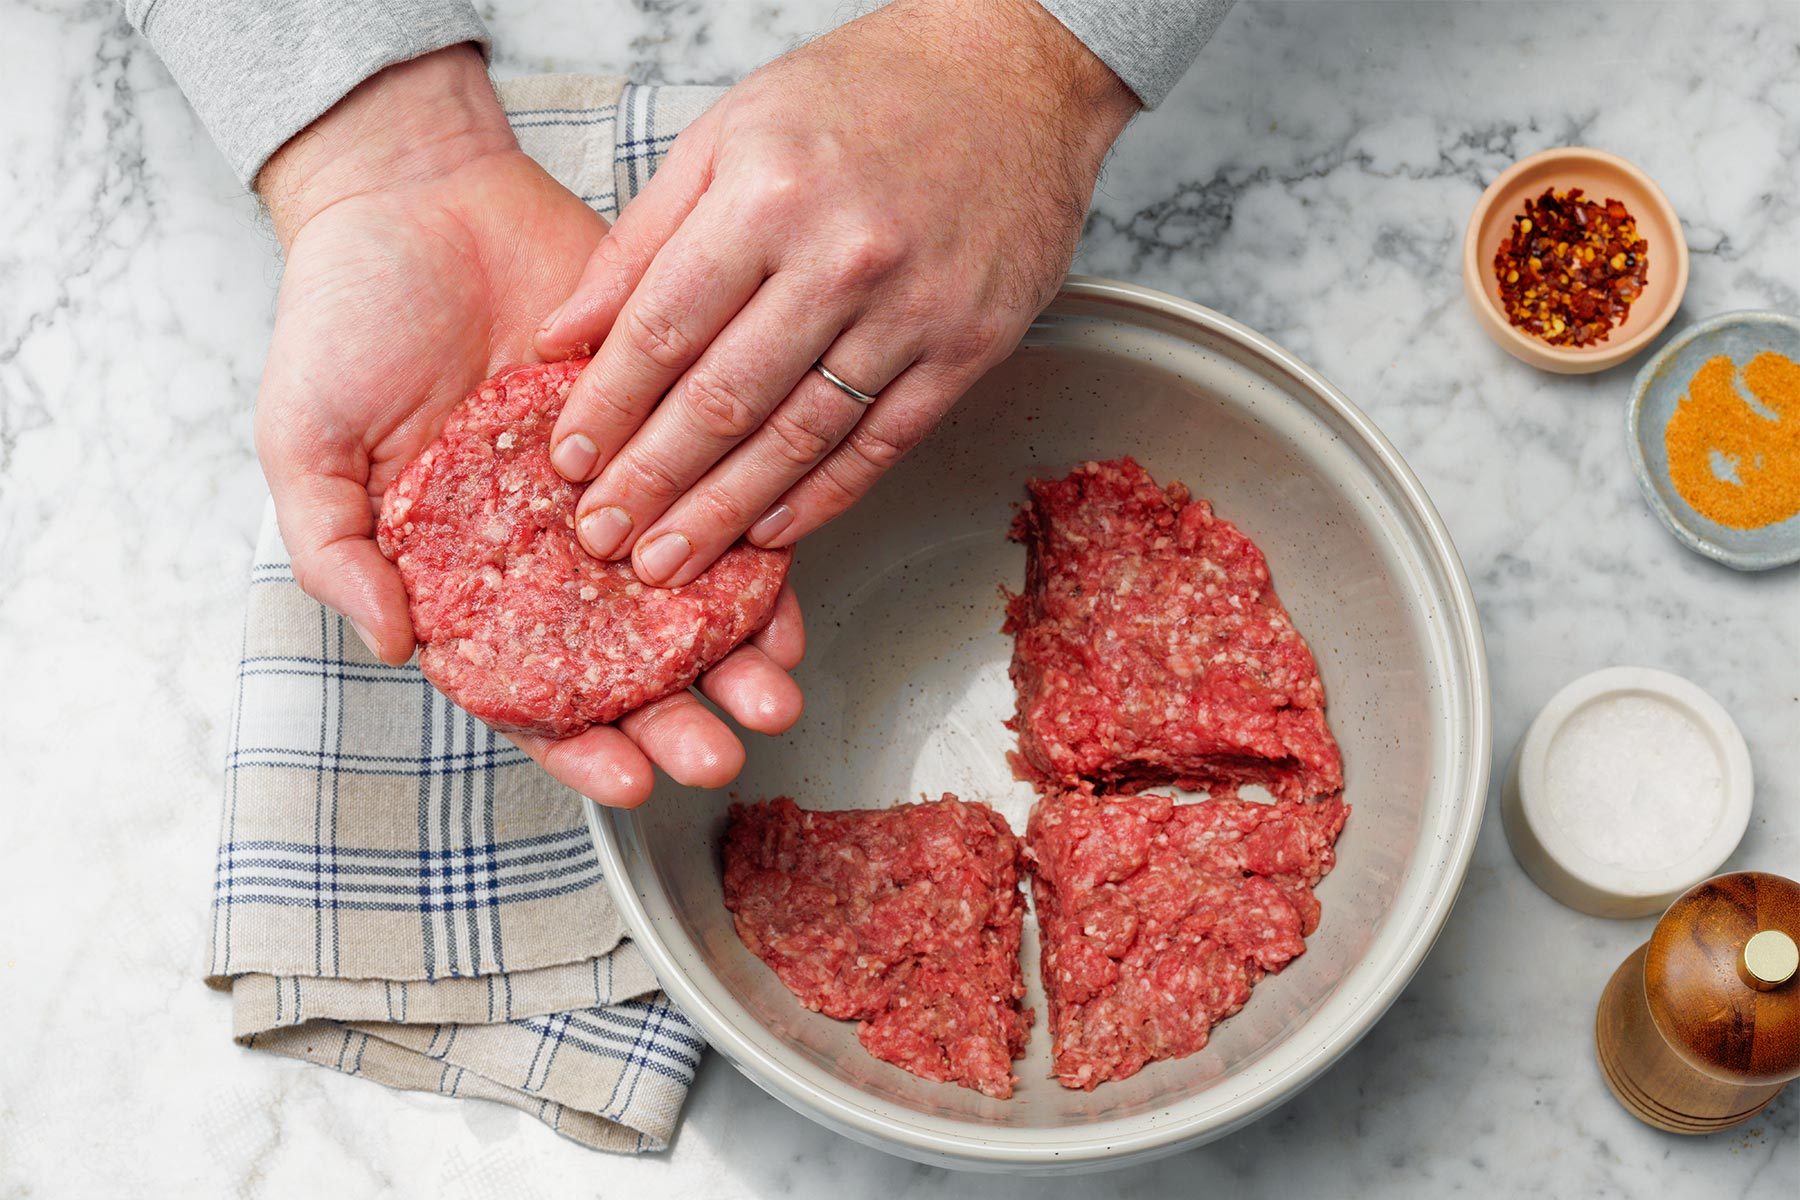 Shaping the meat into patty shapes